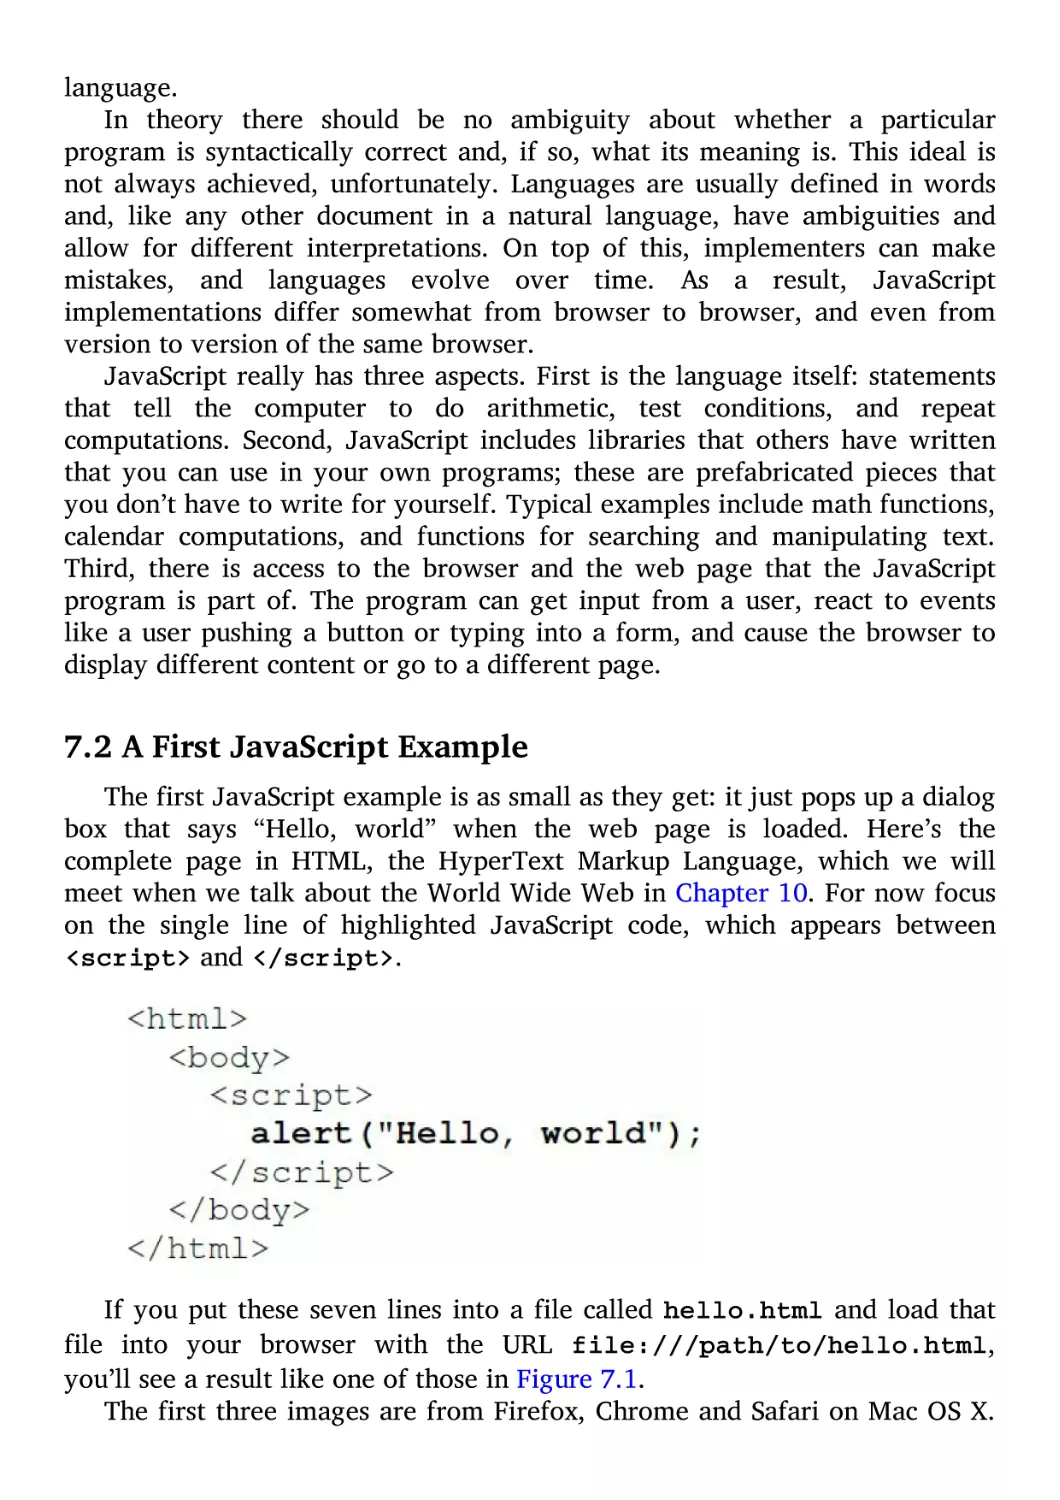 7.2 A First JavaScript Example